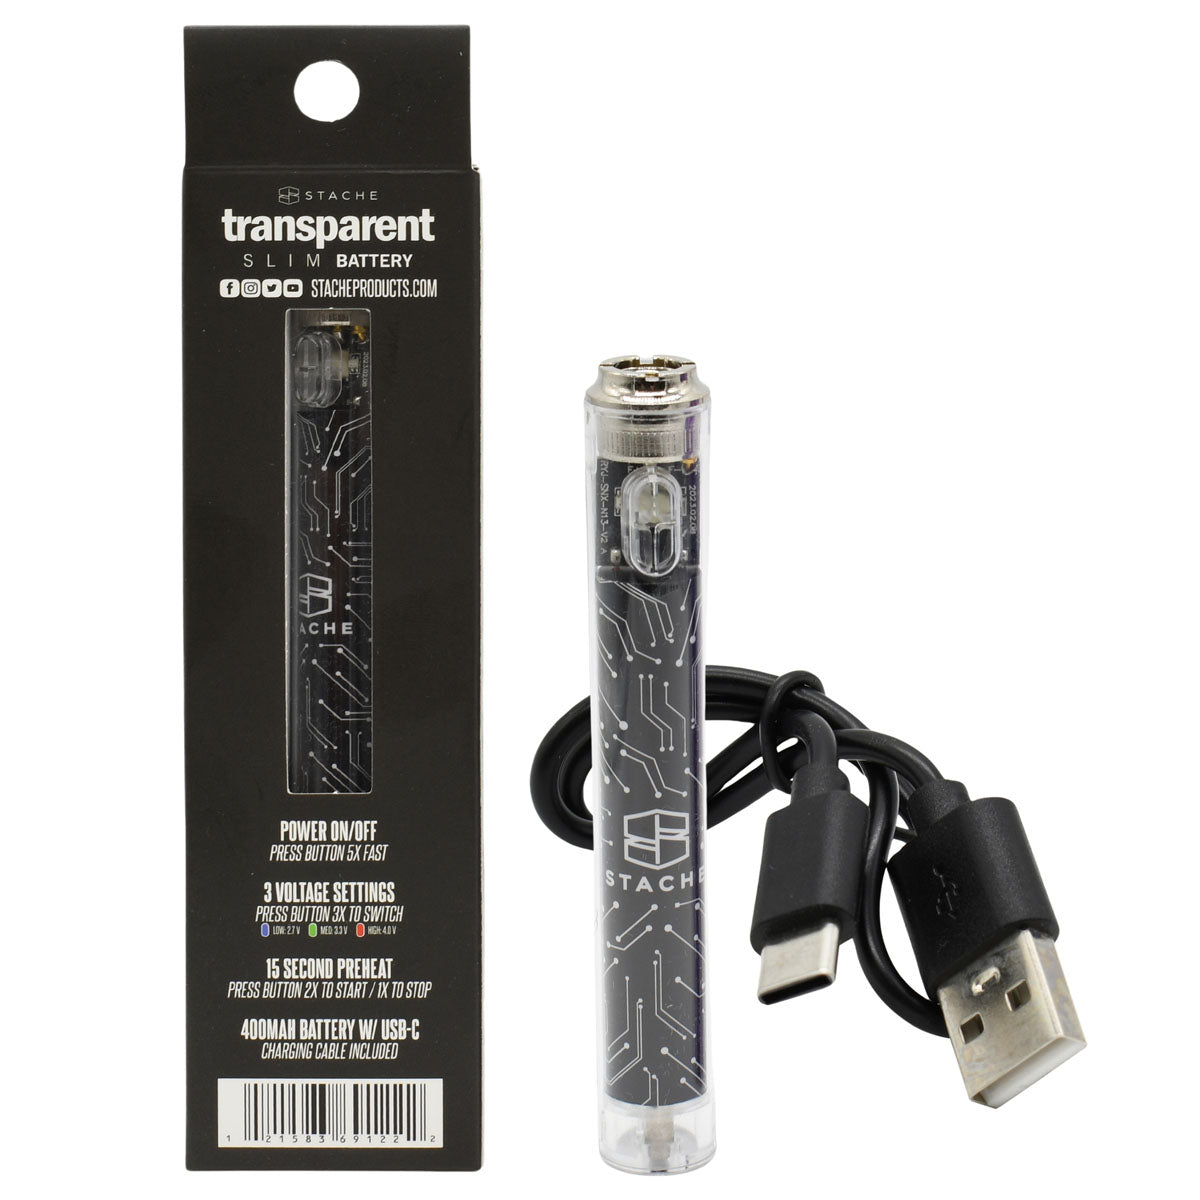 Stache transparent 510 vape battery - black option, with packaging and included USB-C charging cable.